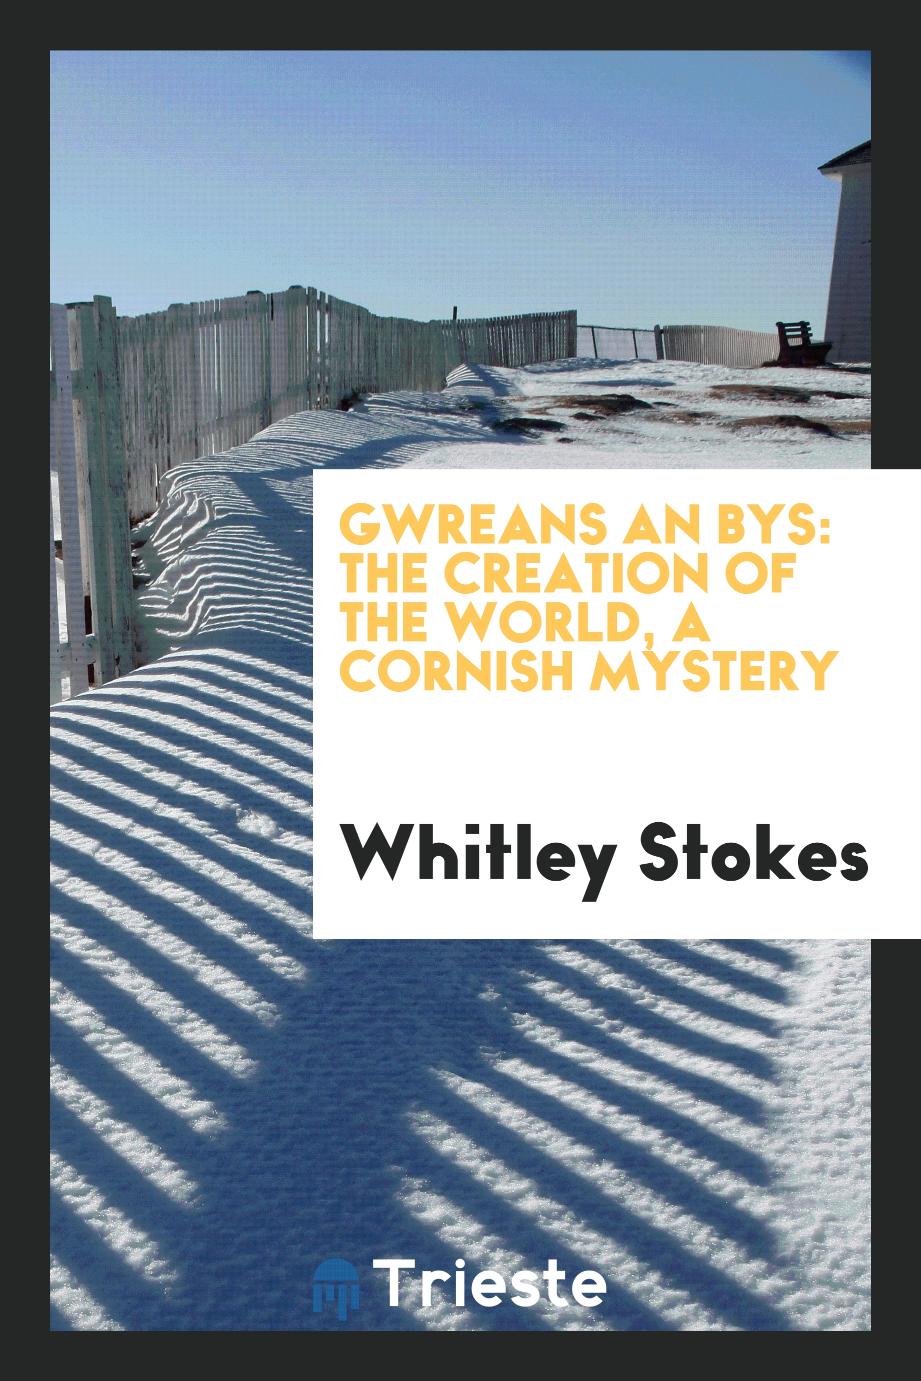 Gwreans an bys: the Creation of the World, a Cornish mystery